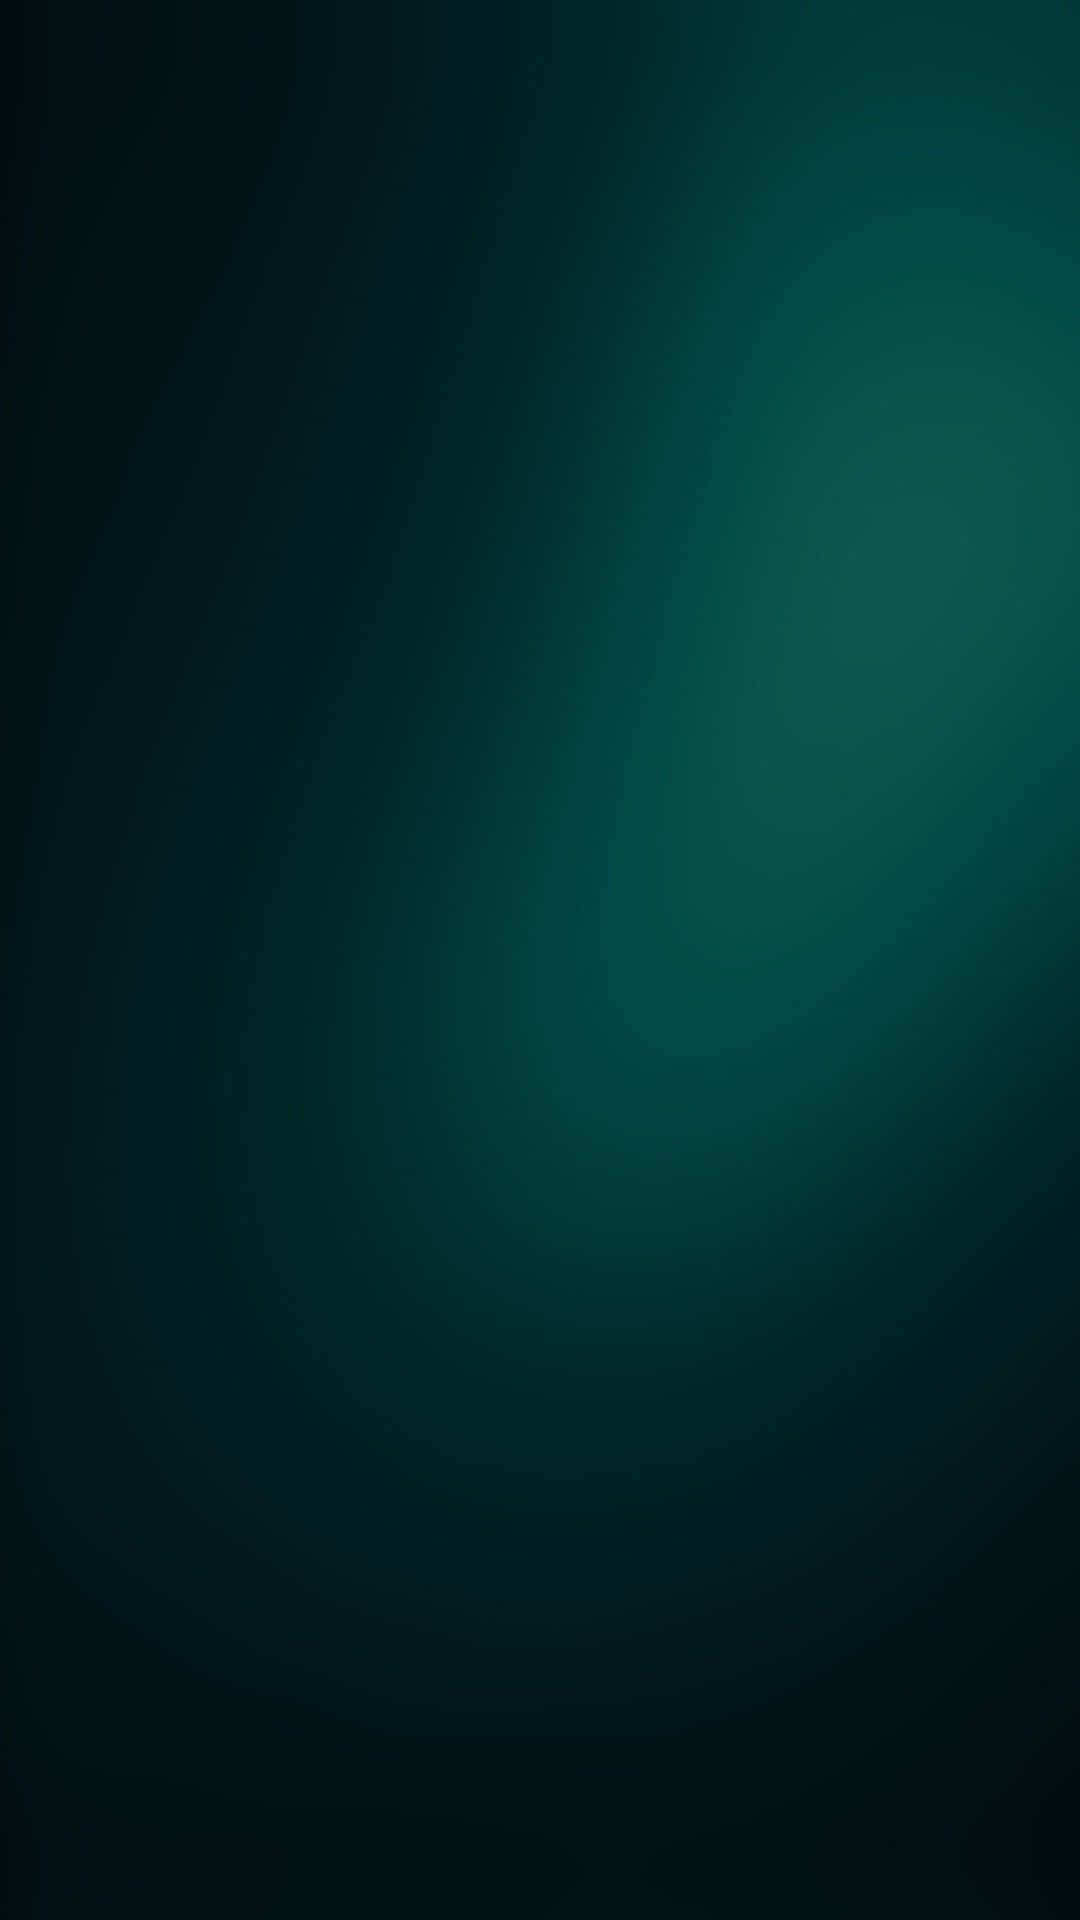 Green Phone on Abstract Background